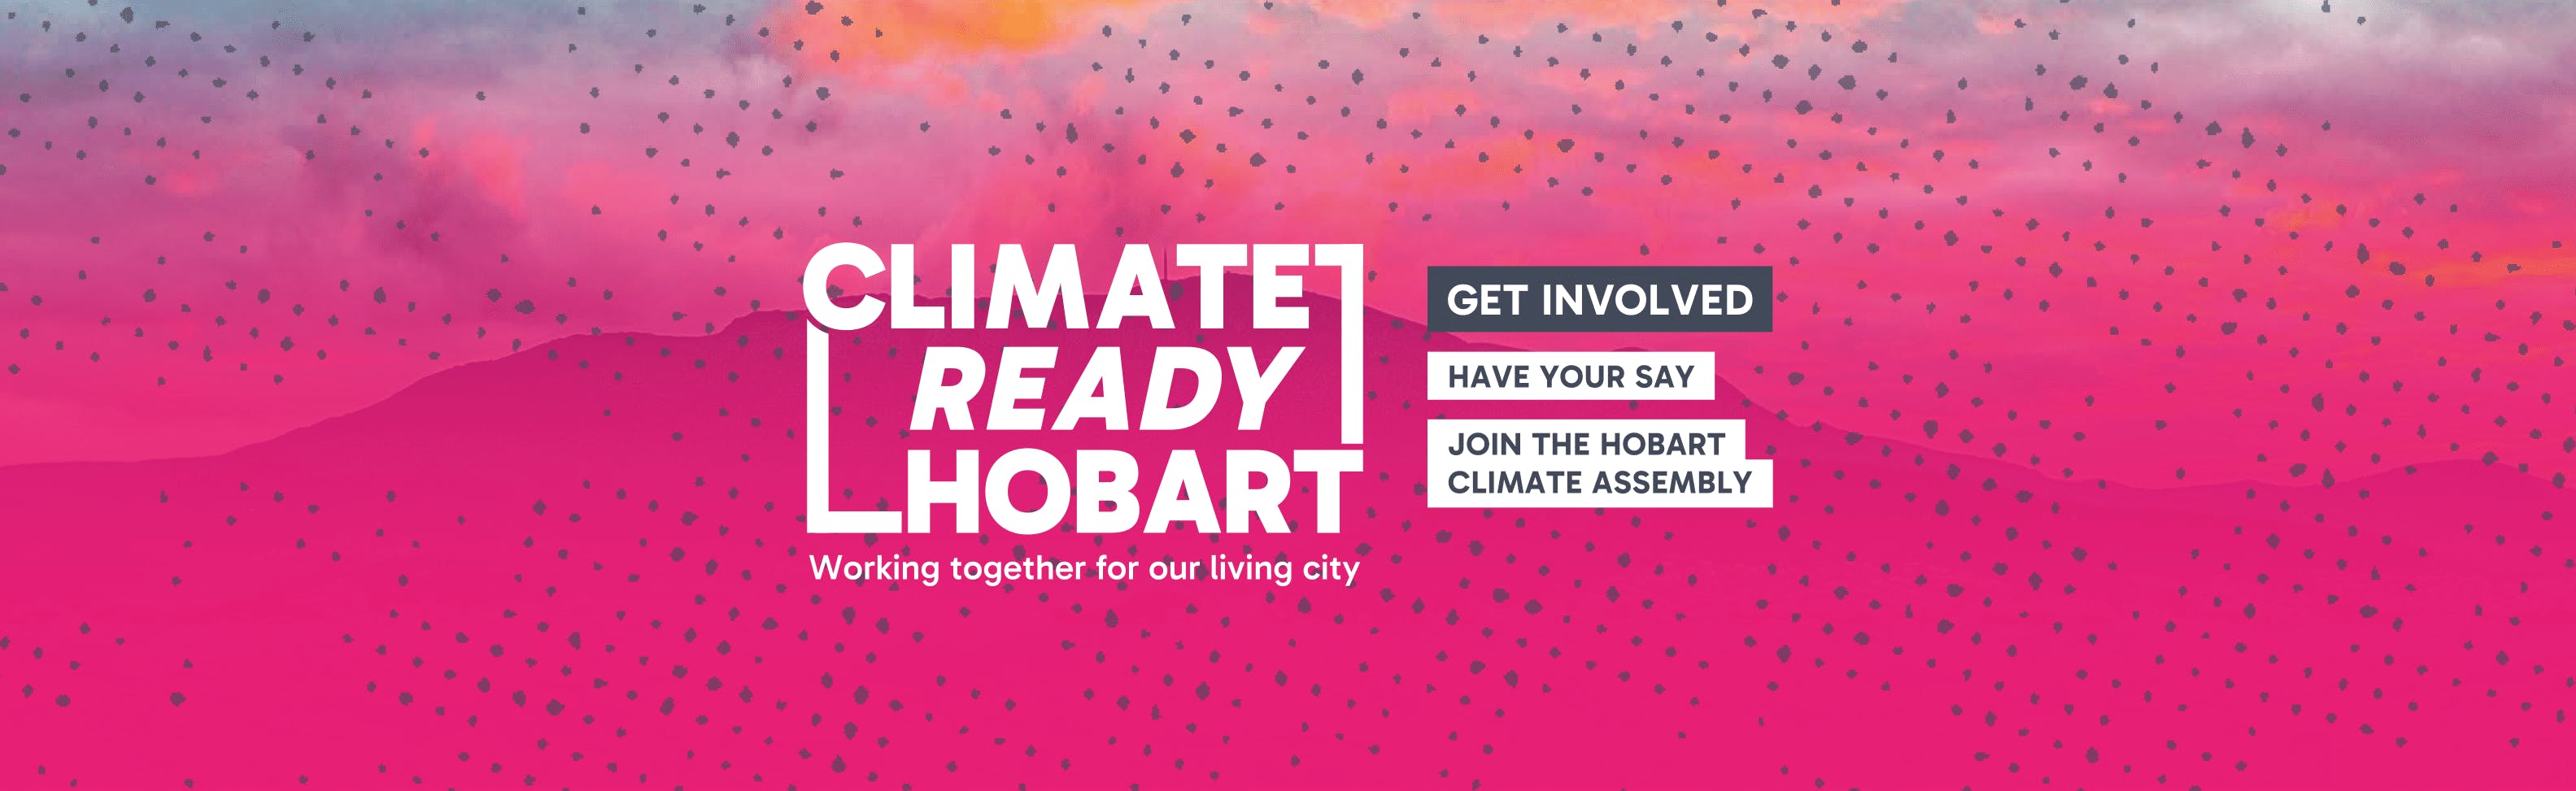 A pink banner with white text. The white text says Climate Ready Hobart.